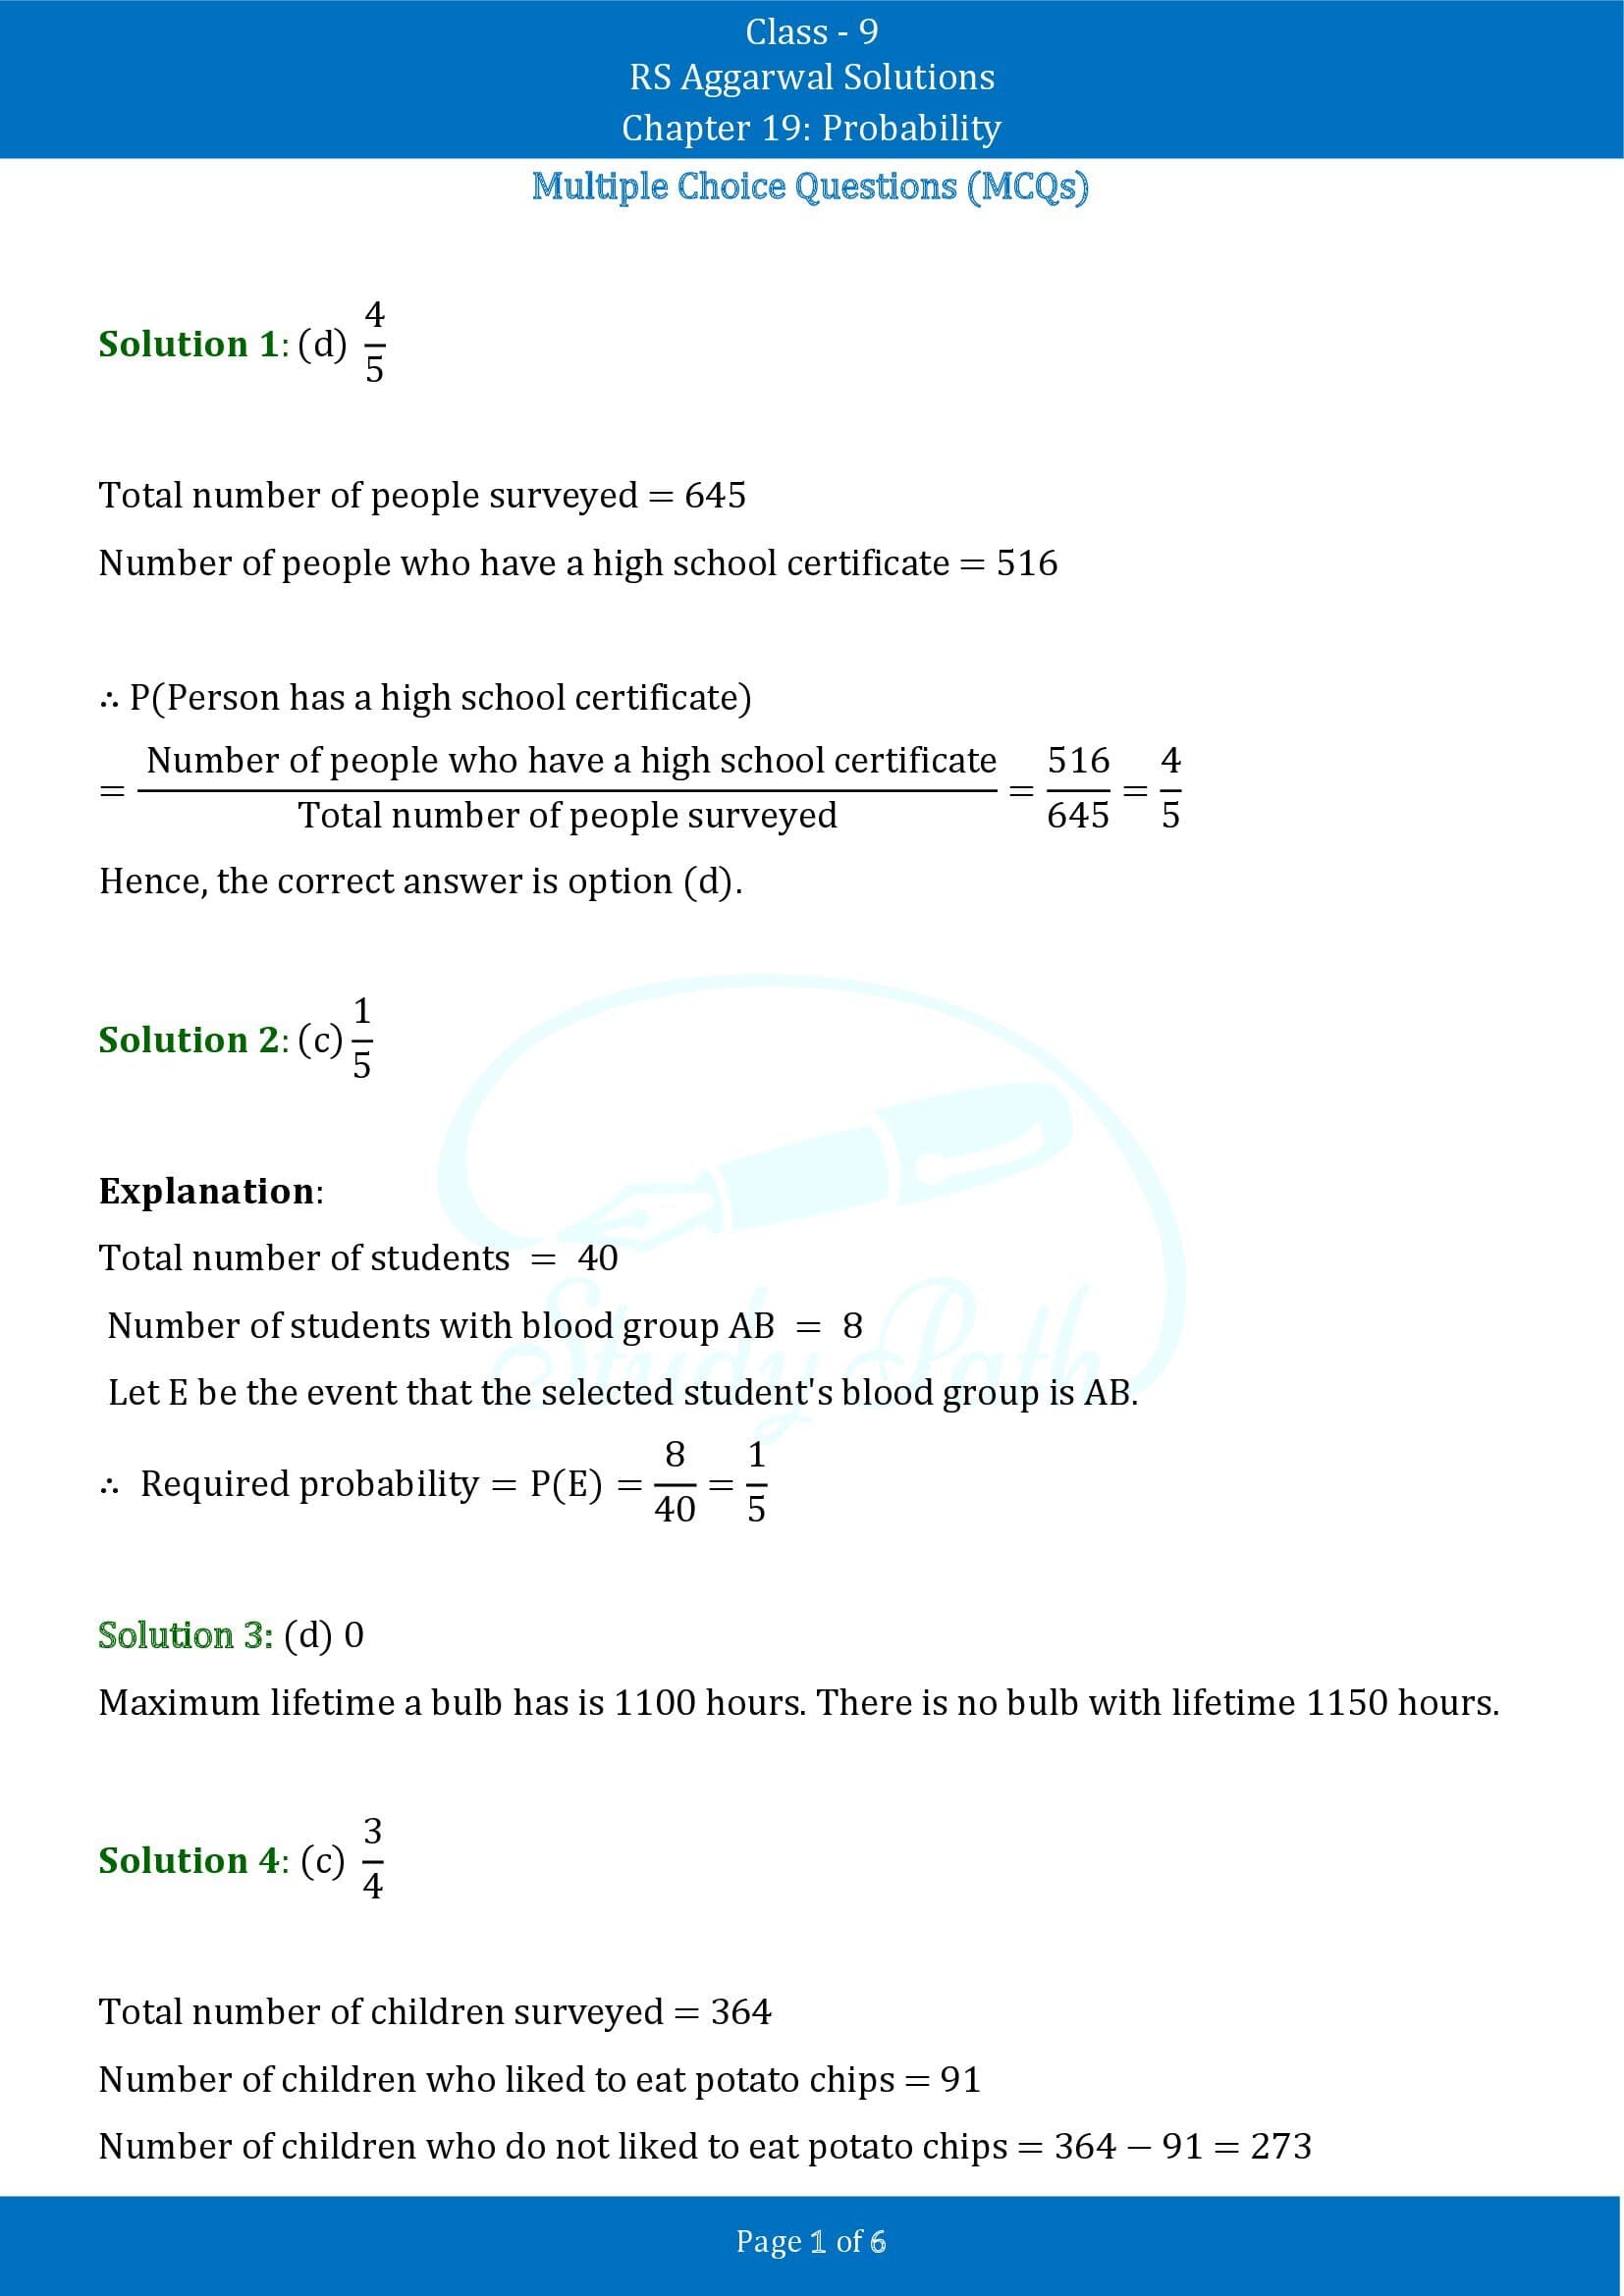 RS Aggarwal Solutions Class 9 Chapter 19 Probability Multiple Choice Questions MCQs 00001